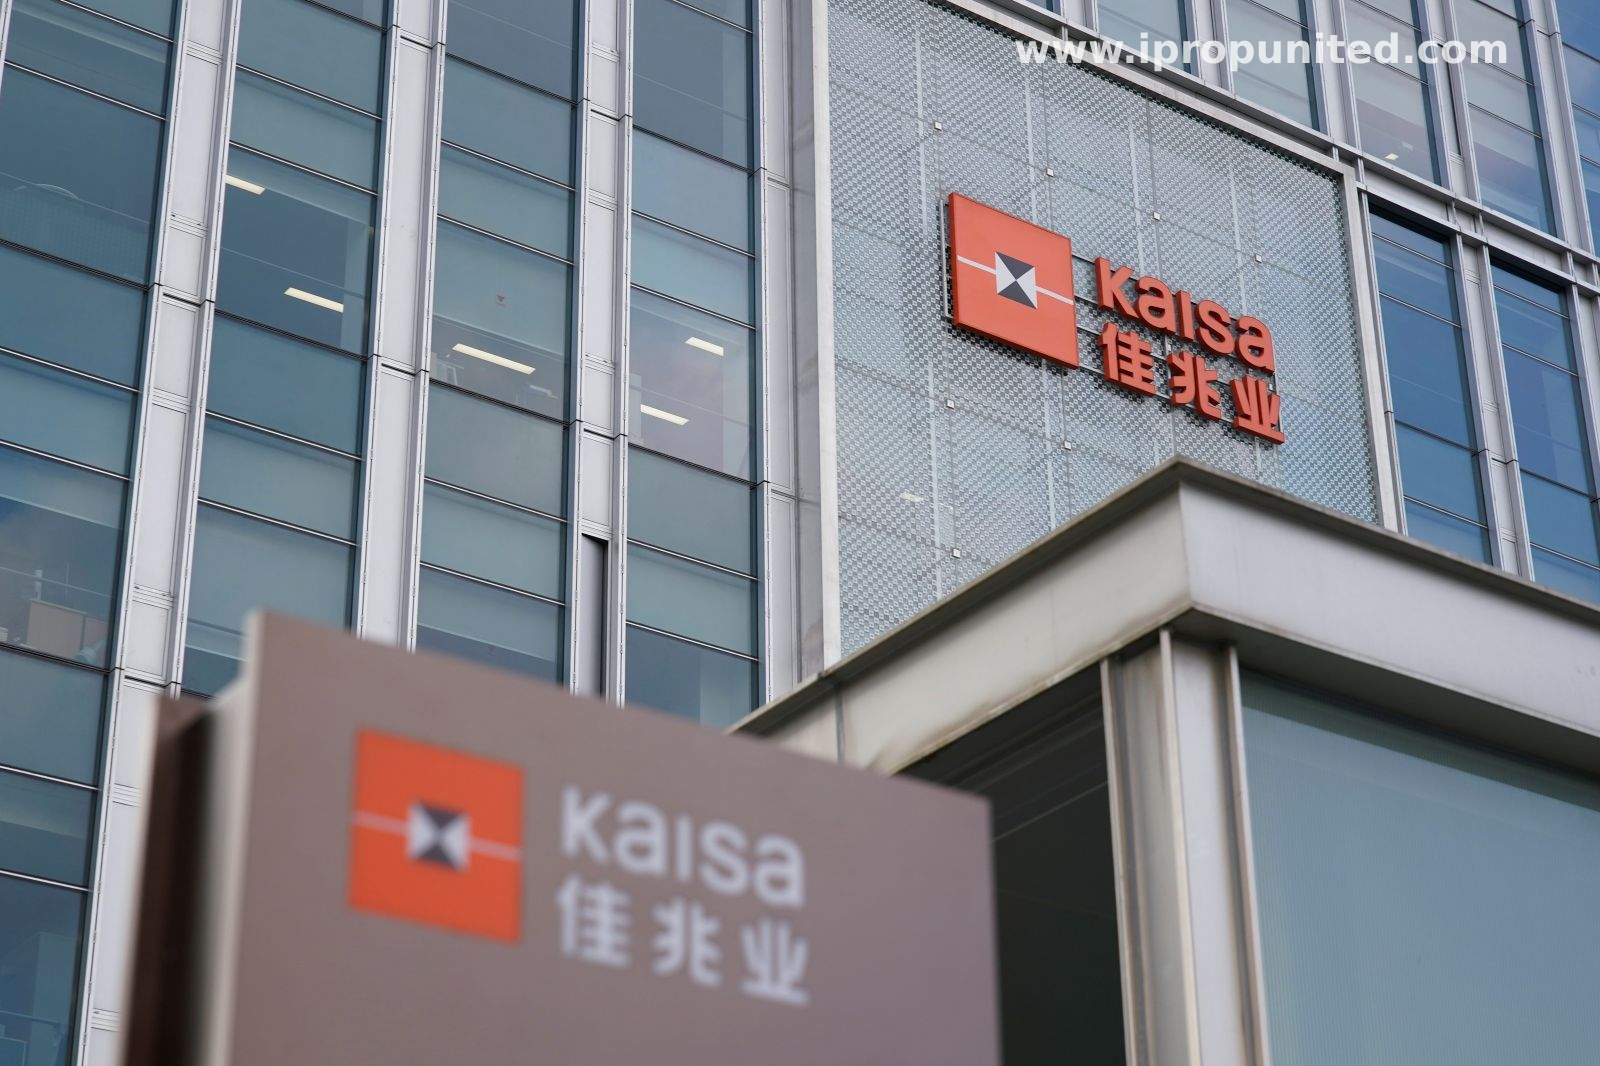 Bondholders have not asked for accelerated repayments yet, says China's Kaisa